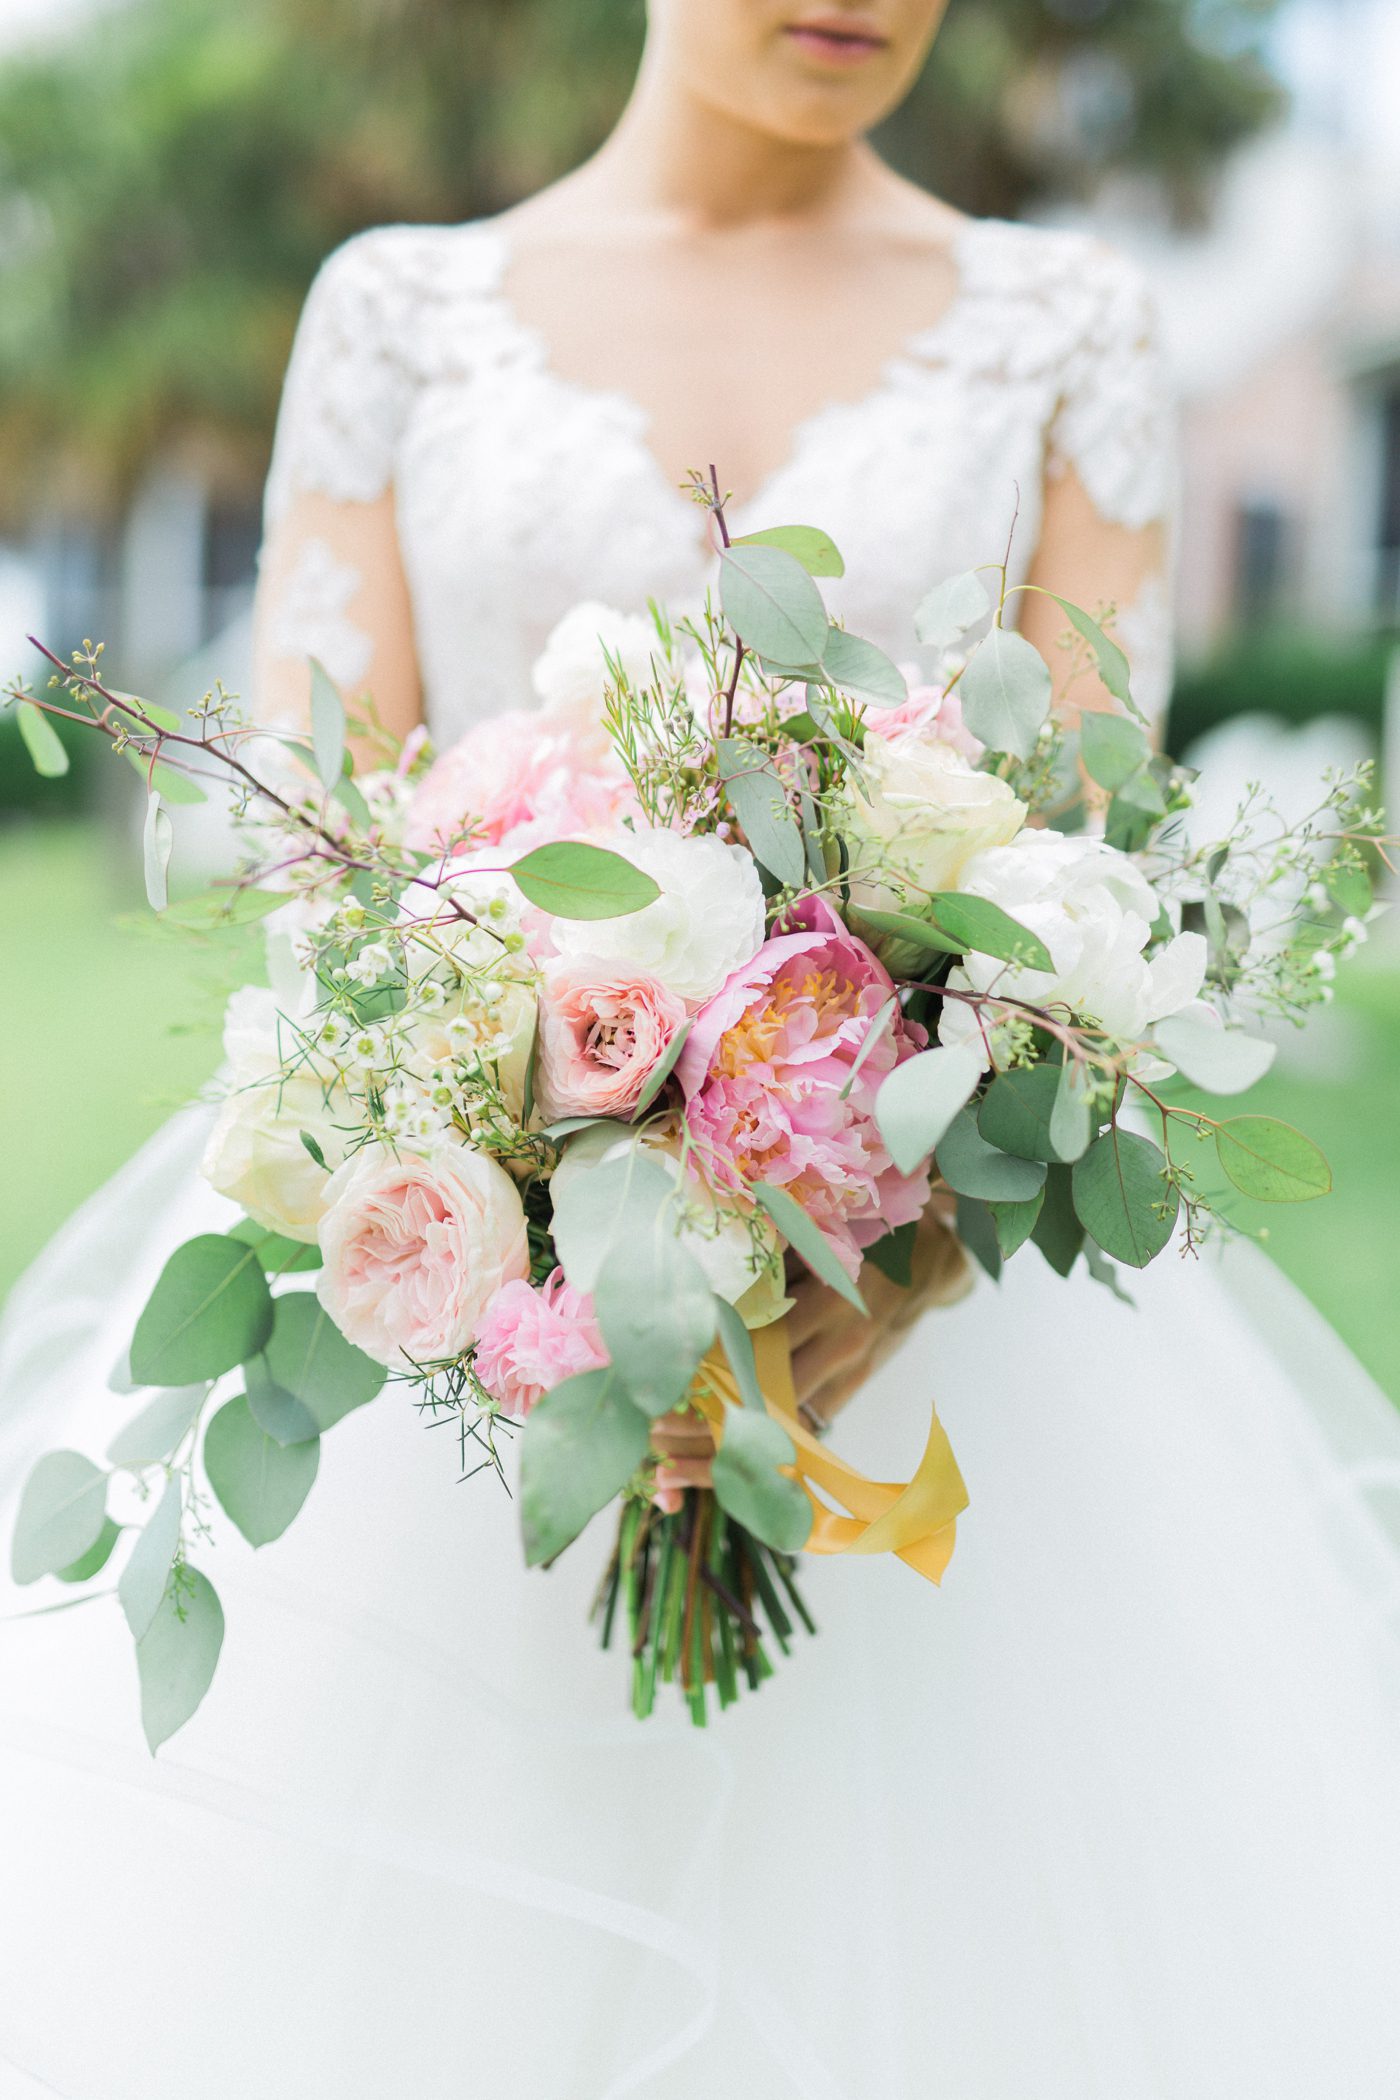 Outdoor bridal portrait in Charleston SC with pink green and white wedding bouquet. Photo by Catherine Ann Photography